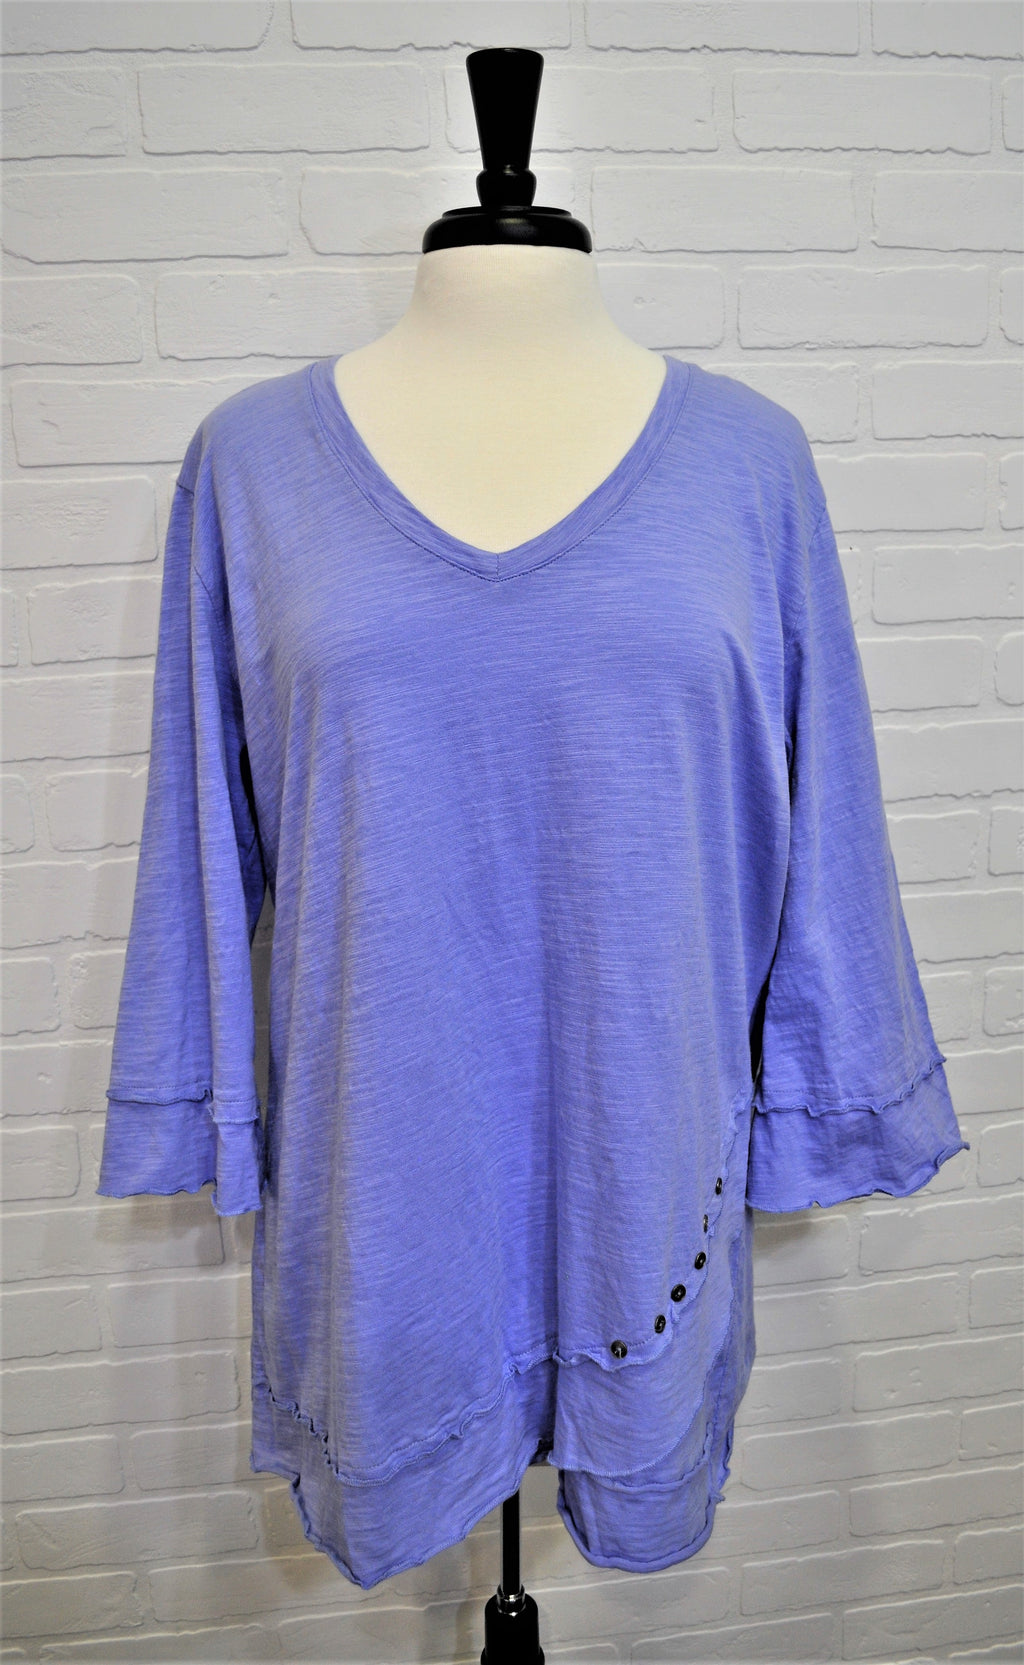 Wild Palms 3/4 Sleeve Side Button Top - Lavender